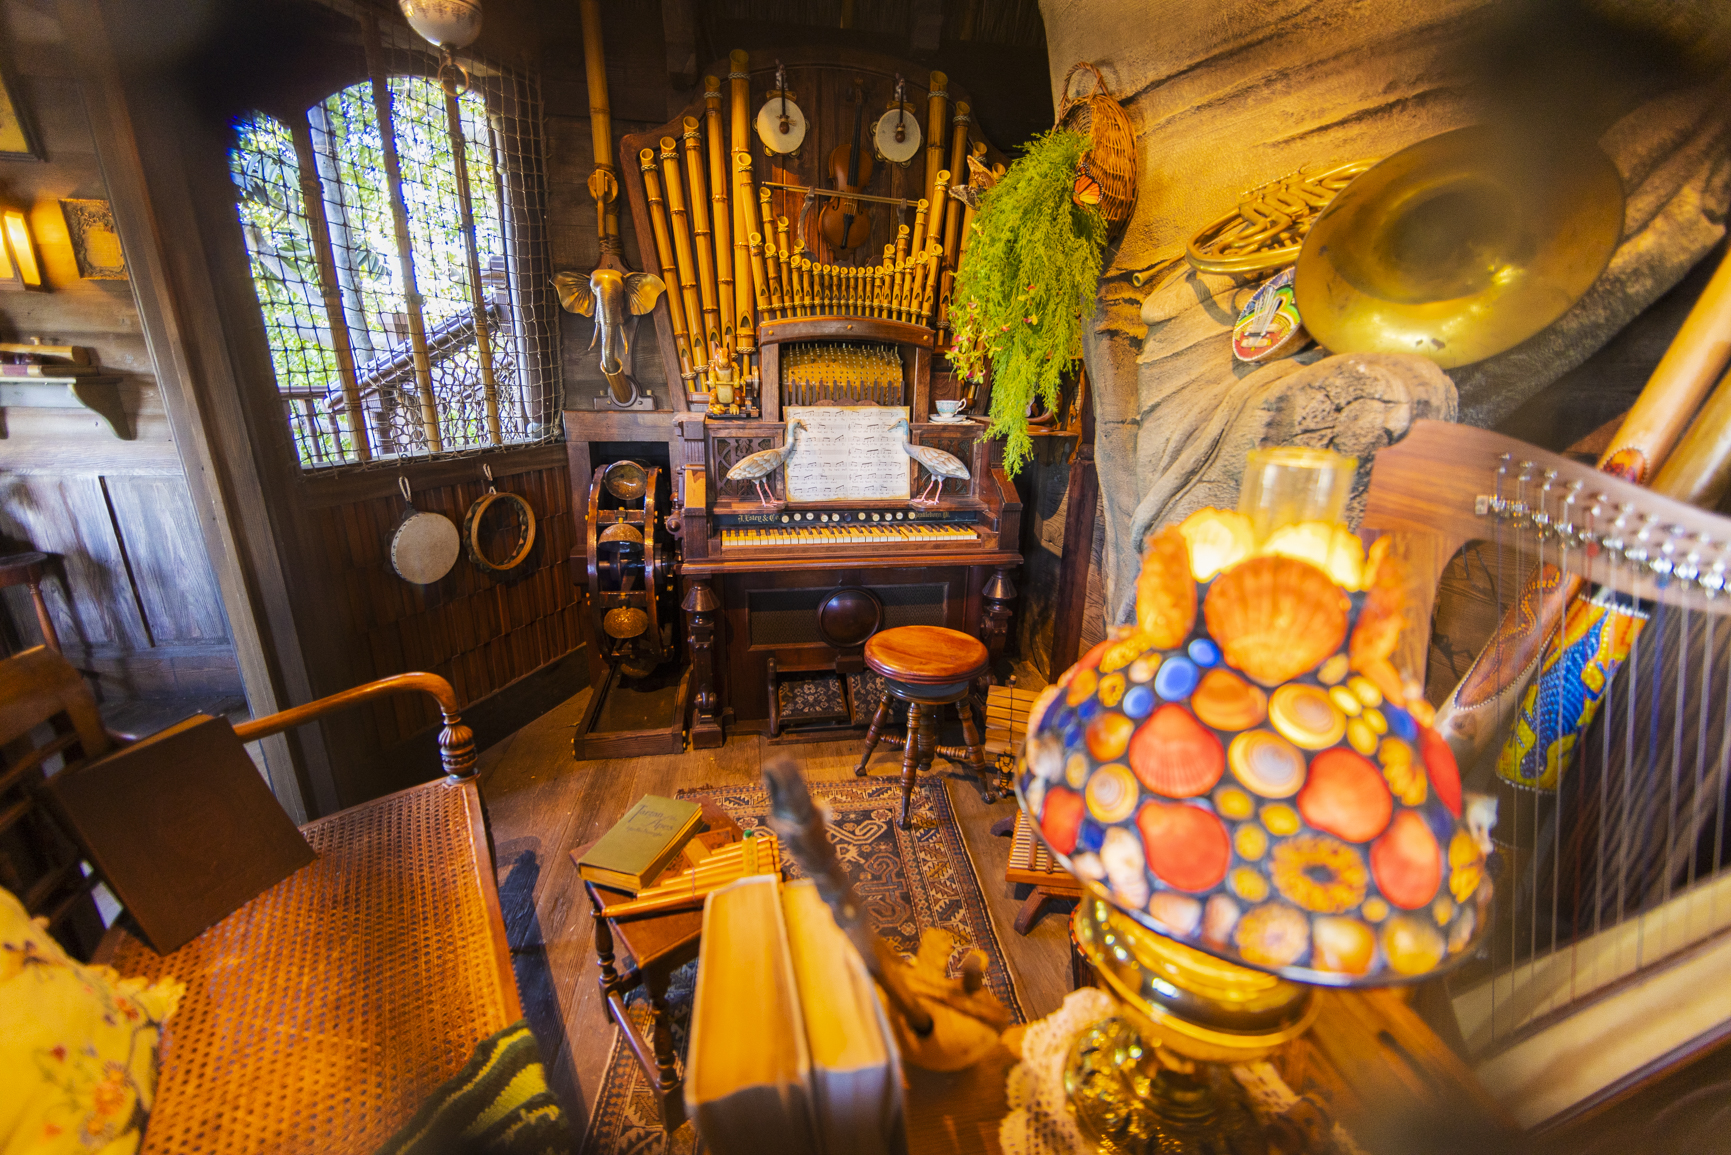 Paying tribute to the original treehouse that Walt Disney and his Imagineers built in 1962 for the movie “Swiss Family Robinson,” the Adventureland Treehouse inspired by Walt Disney’s Swiss Family Robinson will open in a fresh, new way Nov. 10, 2023, at Disneyland Park in Anaheim, Calif. The mother’s room is filled with musical instruments including a harp, lute, guitar and organ, which she plays to fill the home with cheerful melodies. (Christian Thompson/Disneyland Resort)